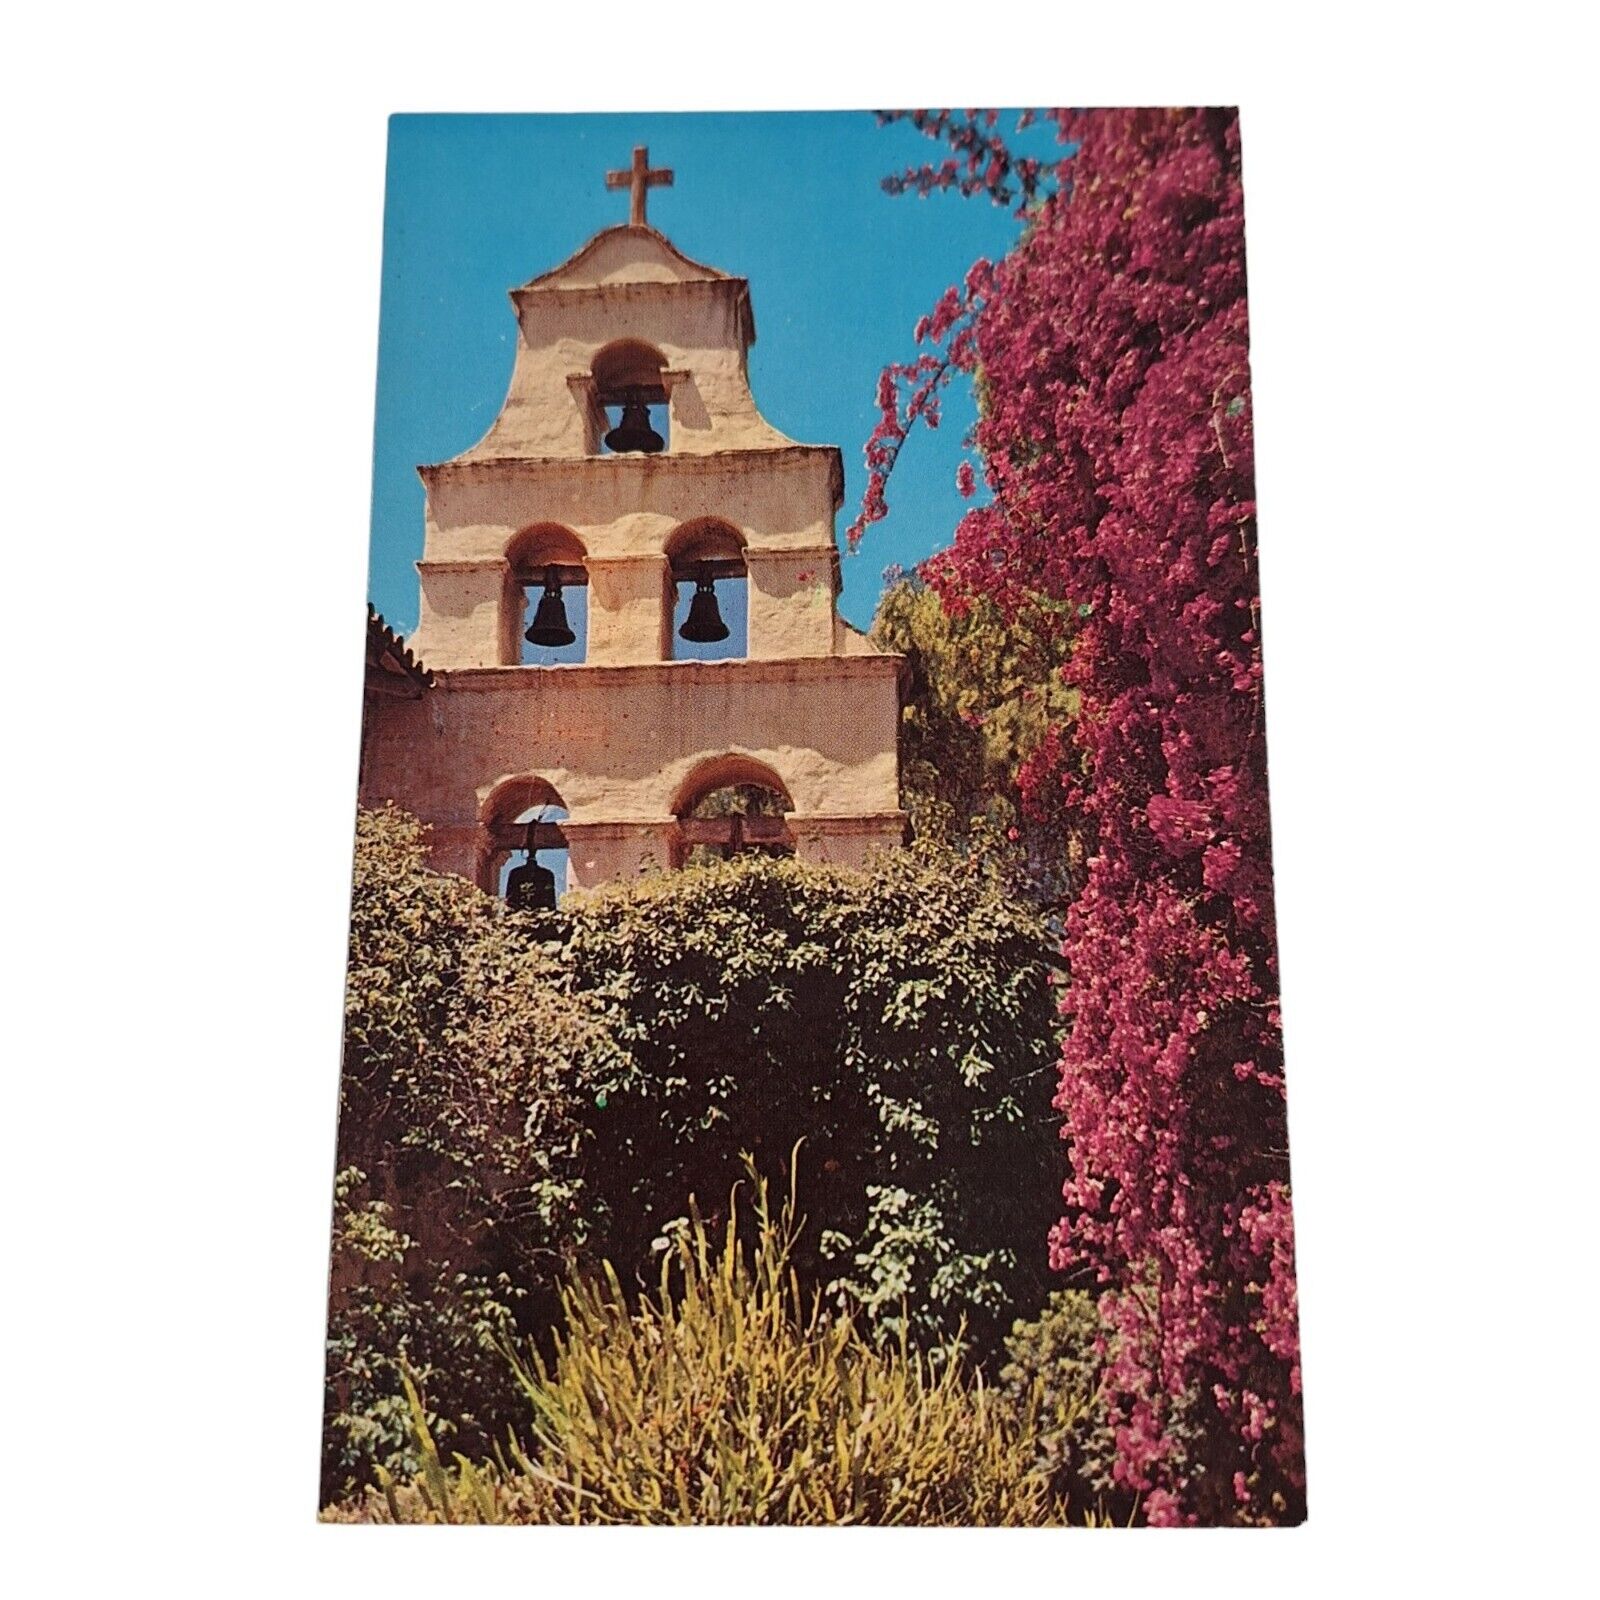 Postcard The Bell Tower Of The Mission San Diego de Alcala San Diego CA Chrome